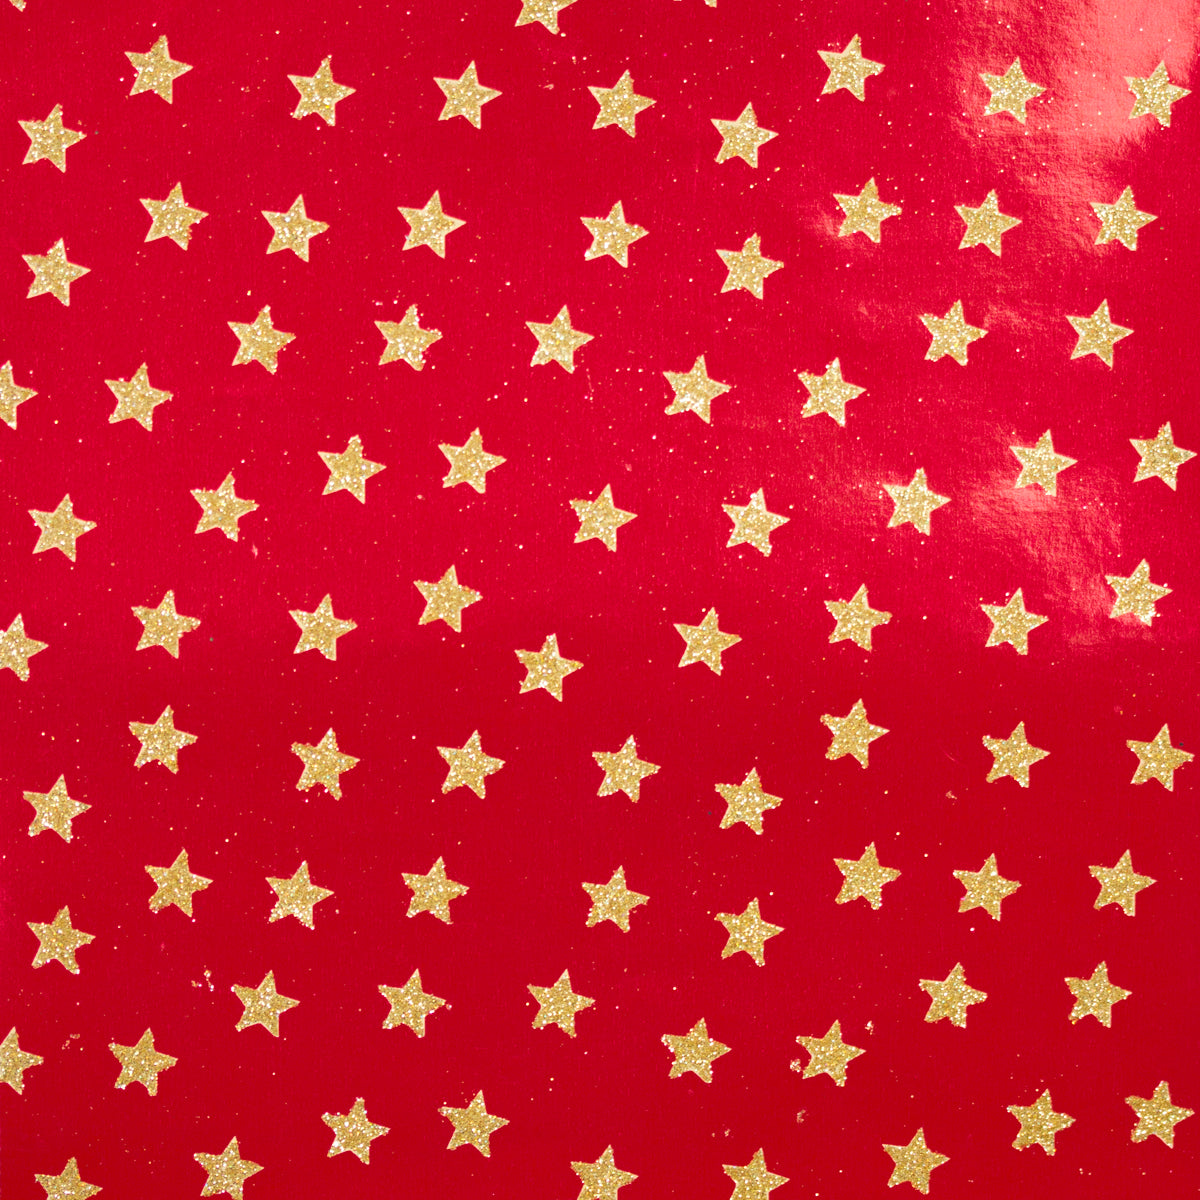 Brocade Mini Star Gold on Red Foil